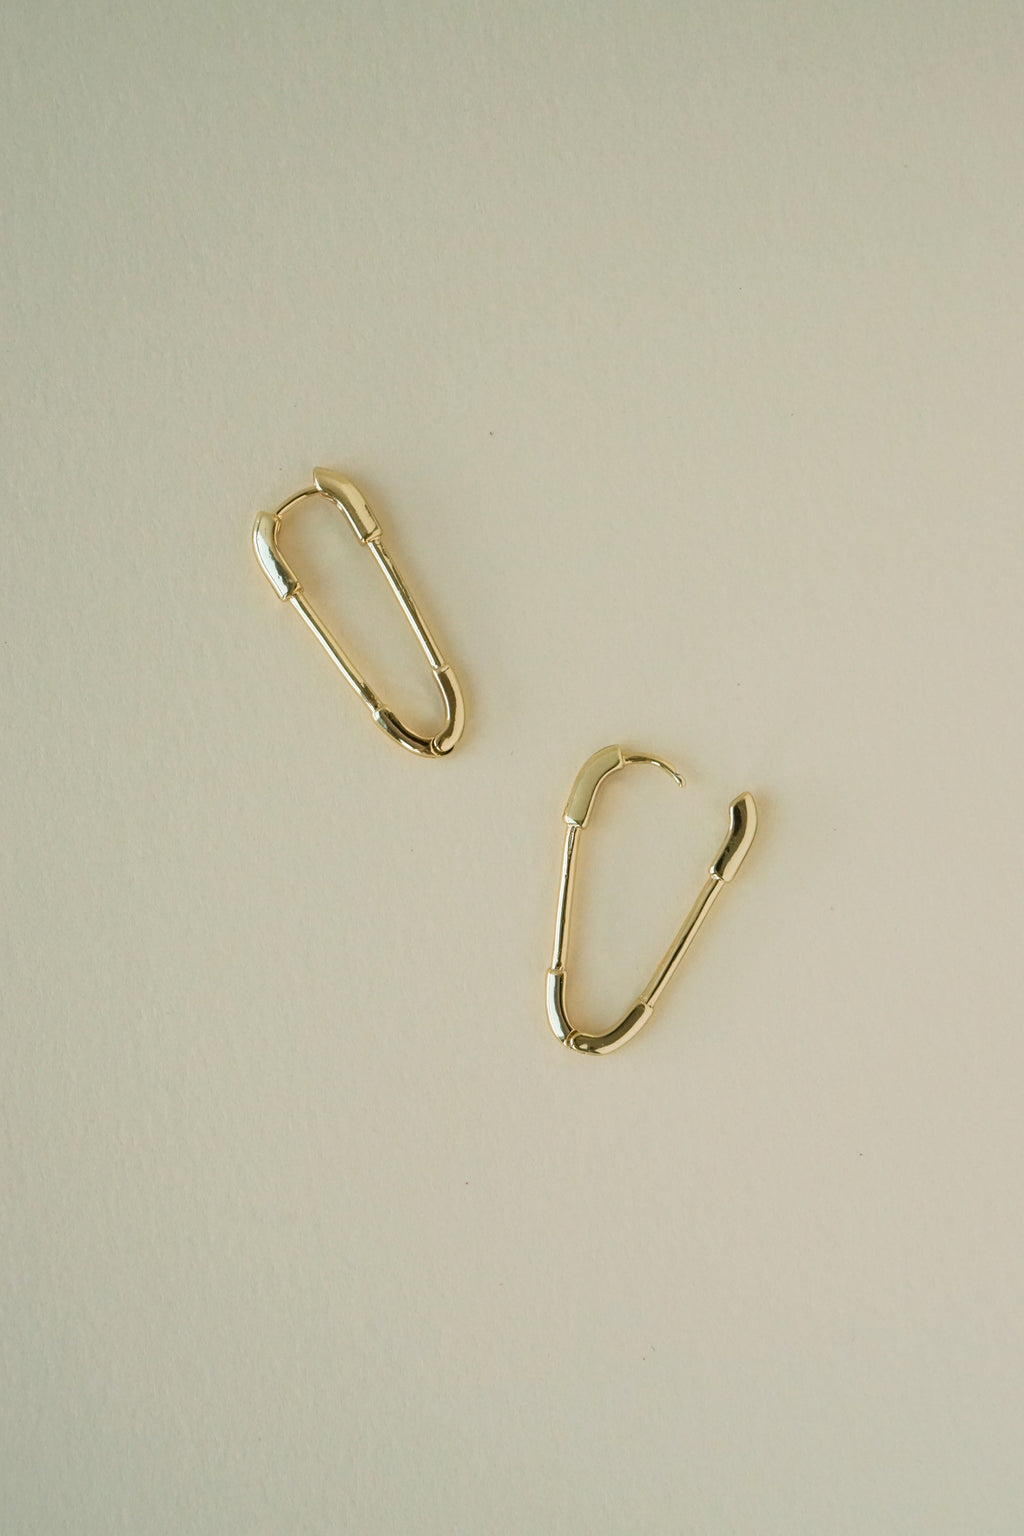 Safety Pin Hoops in Gold